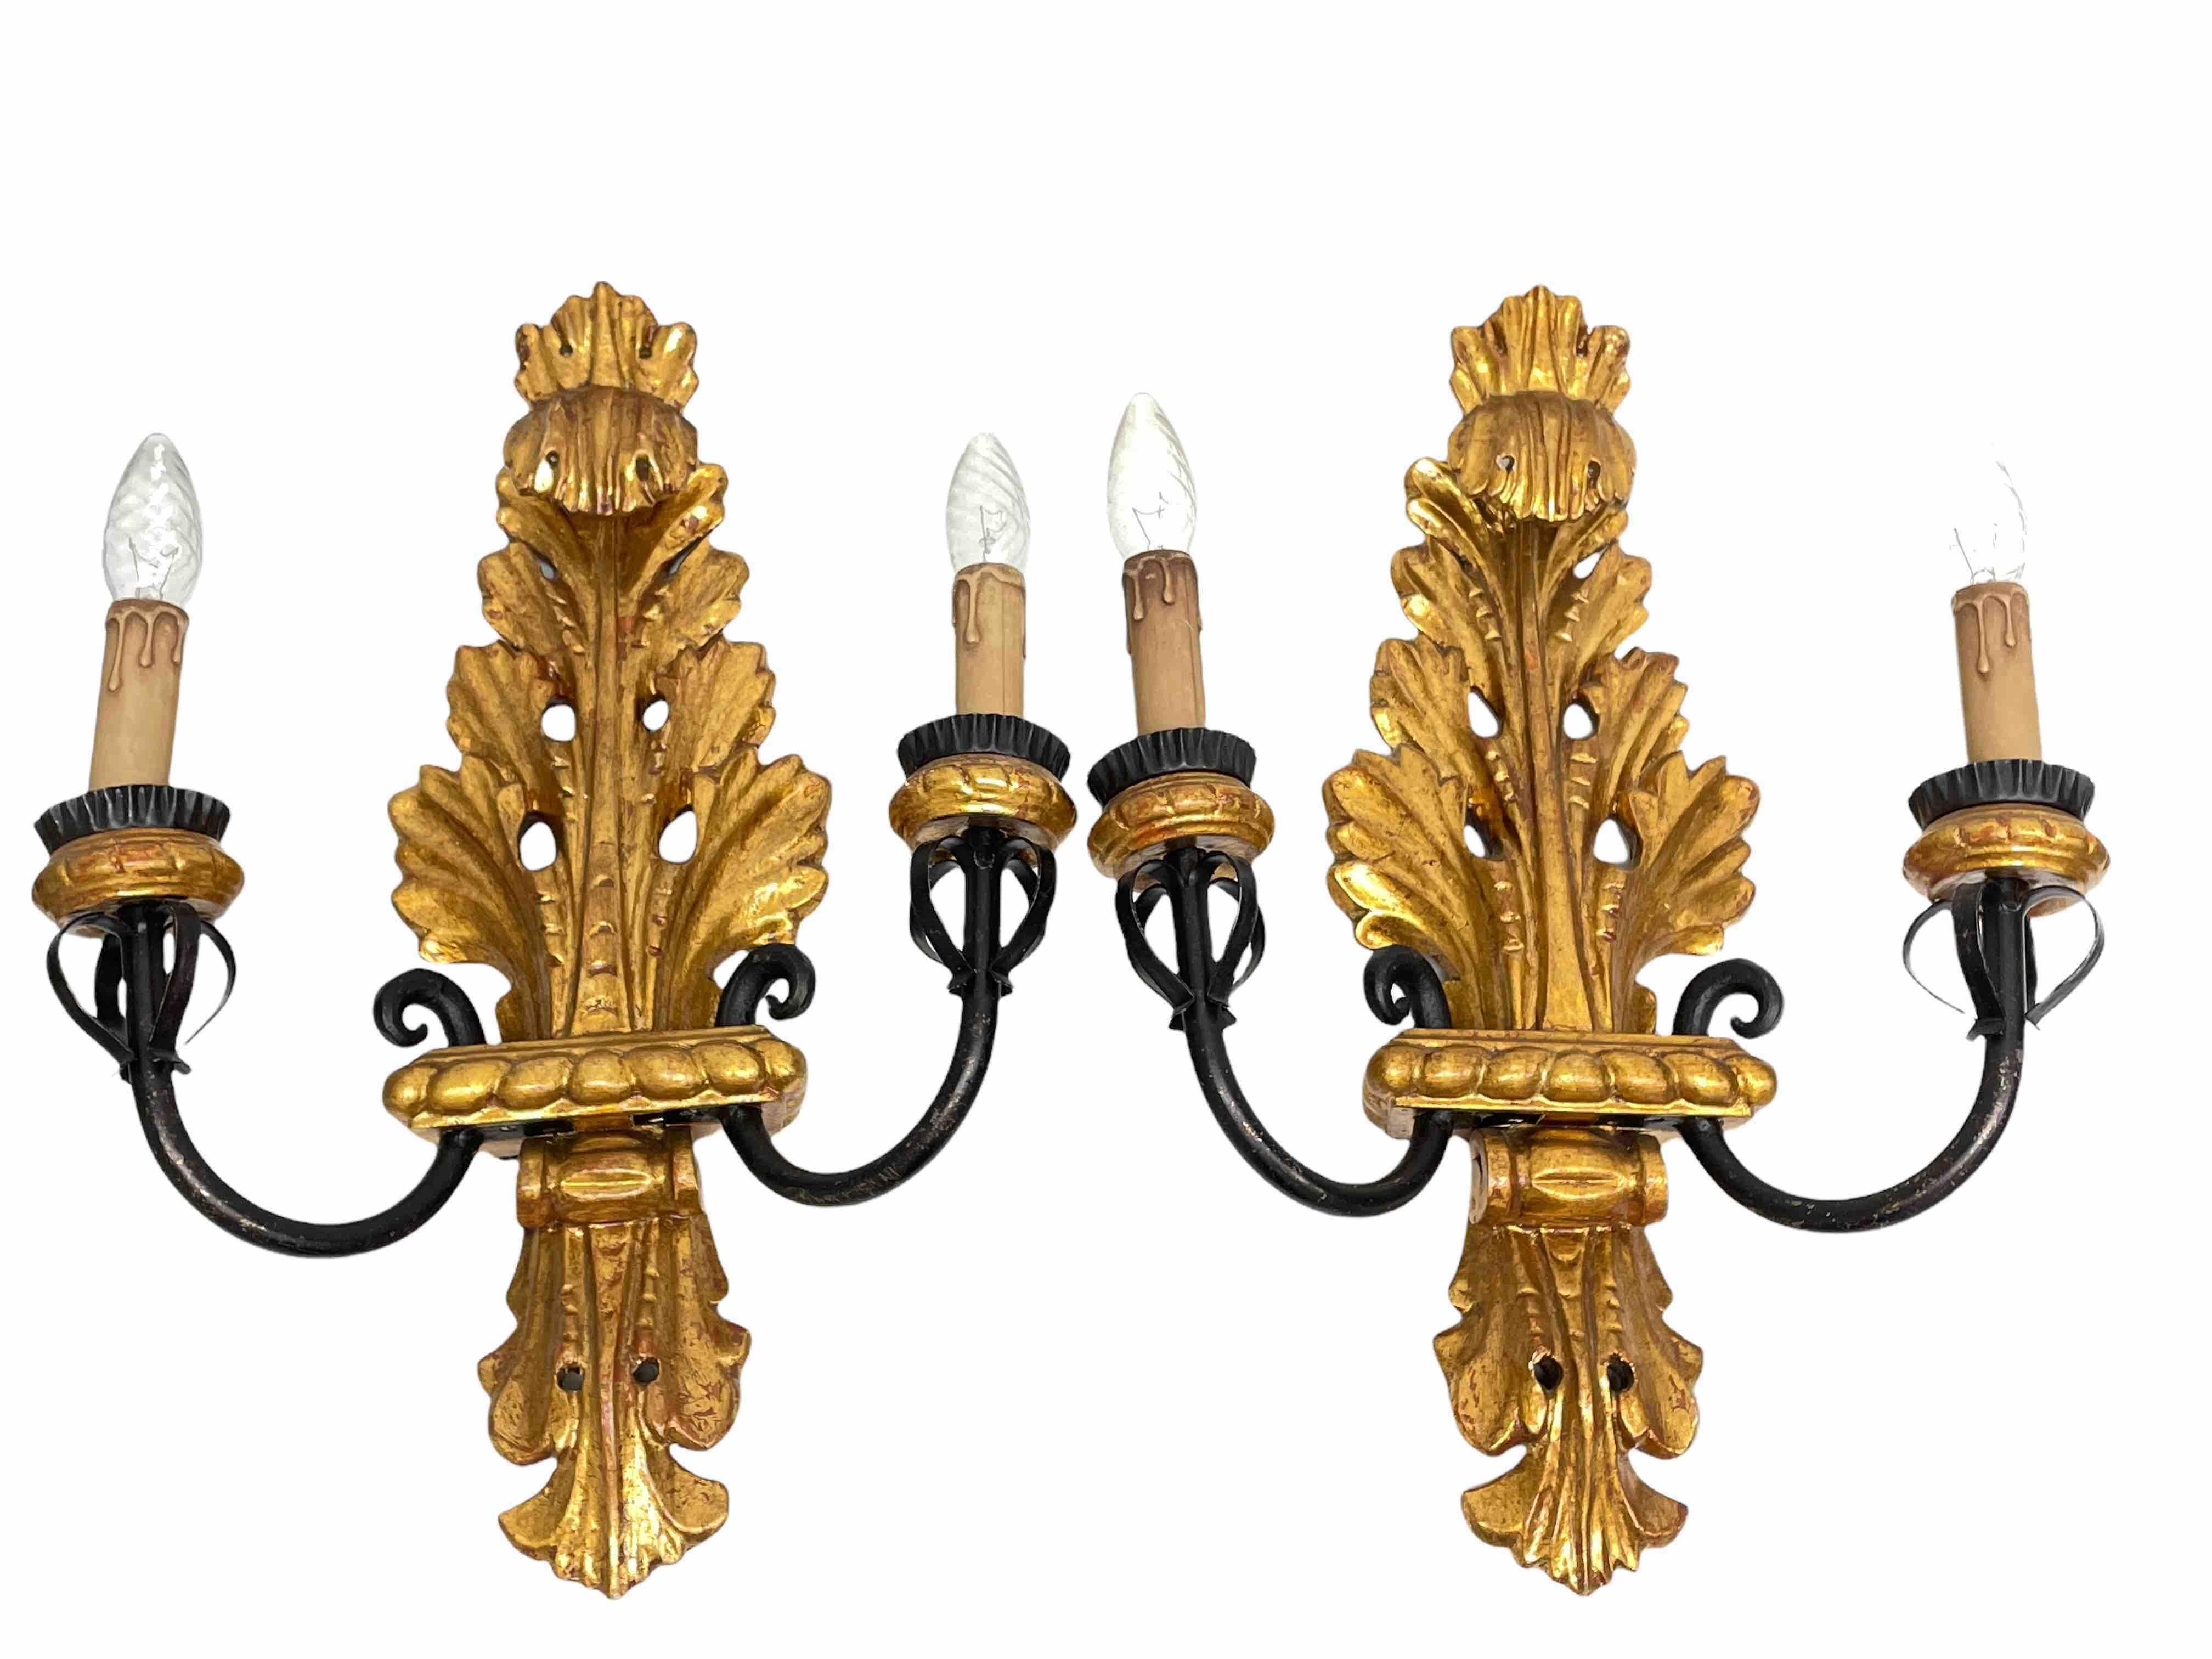 Add a touch of opulence to your home with this set of five charming sconces. Perfect gilt wood and ebonized metal too enhance any chic or eclectic home. We'd love to see them hanging in an entryway as a charming welcome home or your living room.